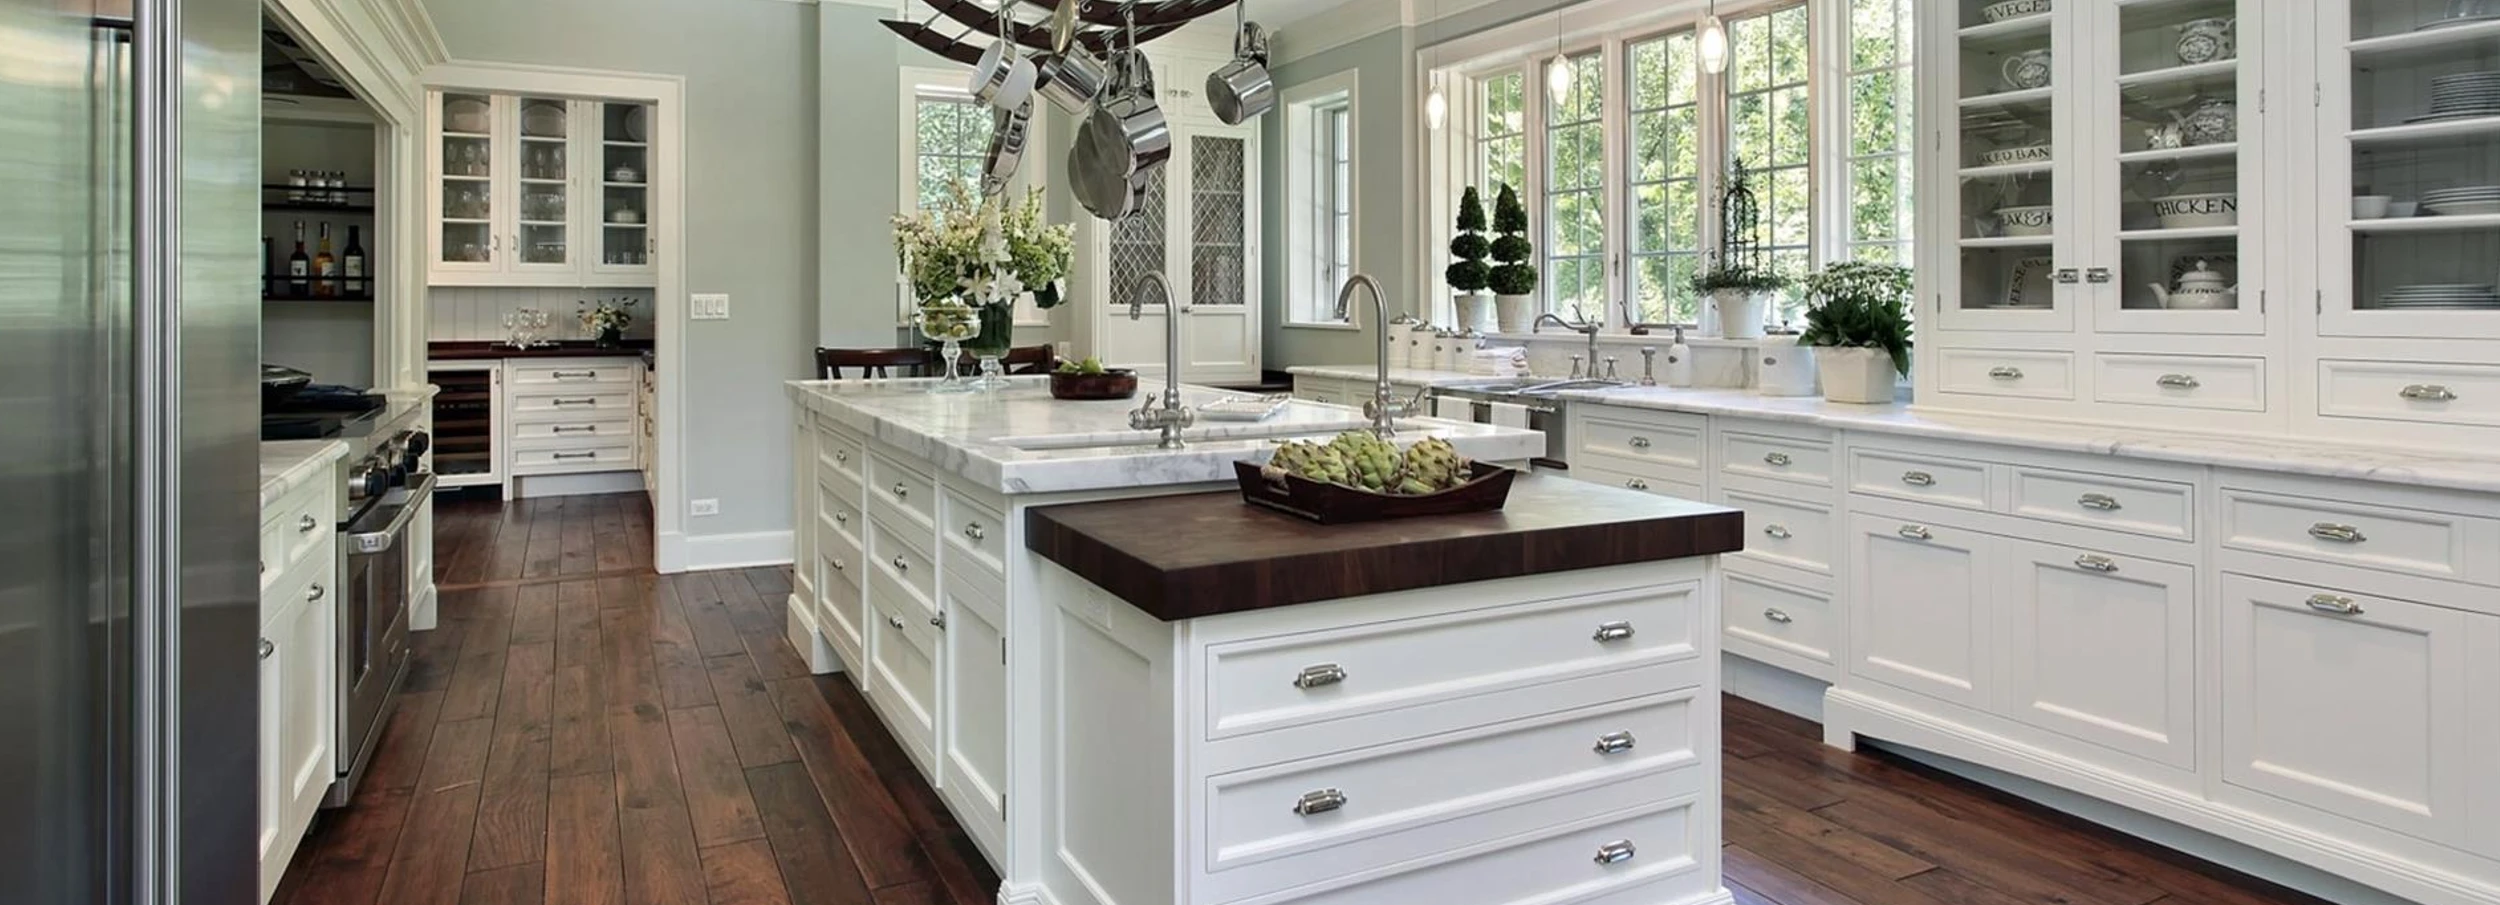 A kitchen with white cabinets, a center island and decorated with green plants throughout.